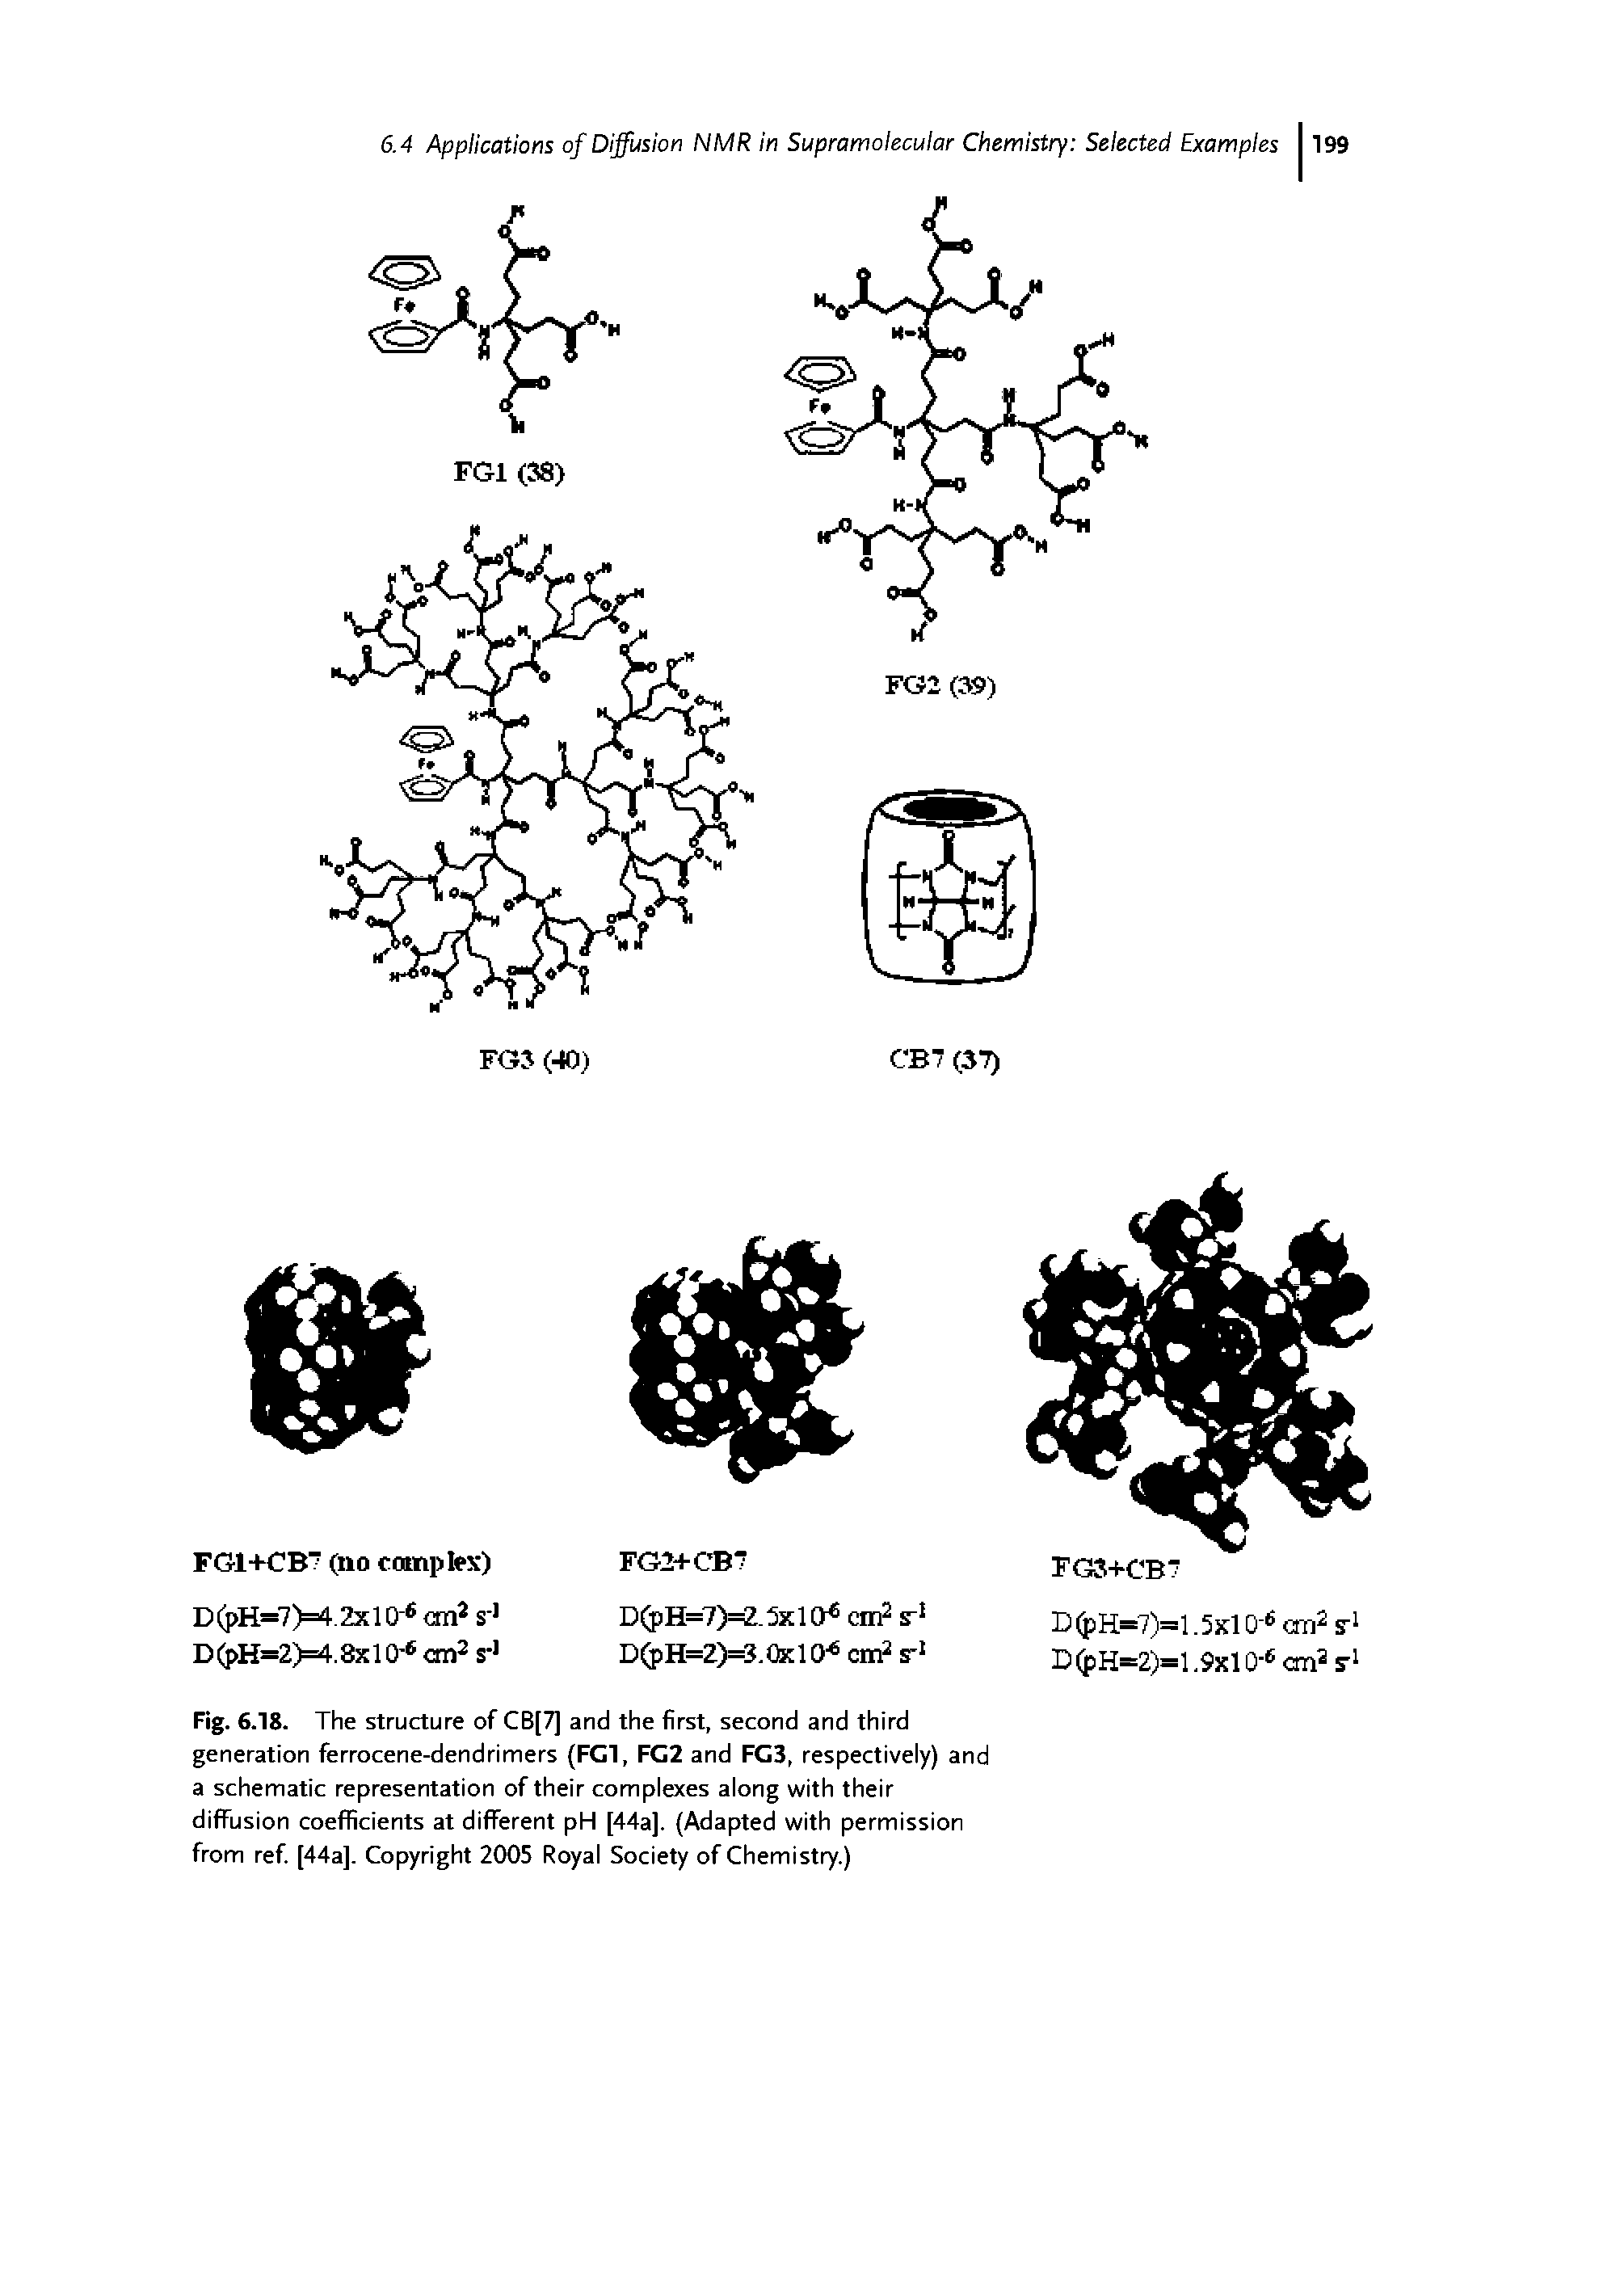 Fig. 6.18. The structure of CB[7] and the first, second and third generation ferrocene-dendrimers (FCl, FC2 and FC3, respectively) and a schematic representation of their complexes along with their diffusion coefficients at different pH [44a]. (Adapted with permission from ref. [44a]. Copyright 2005 Royal Society of Chemistry.)...